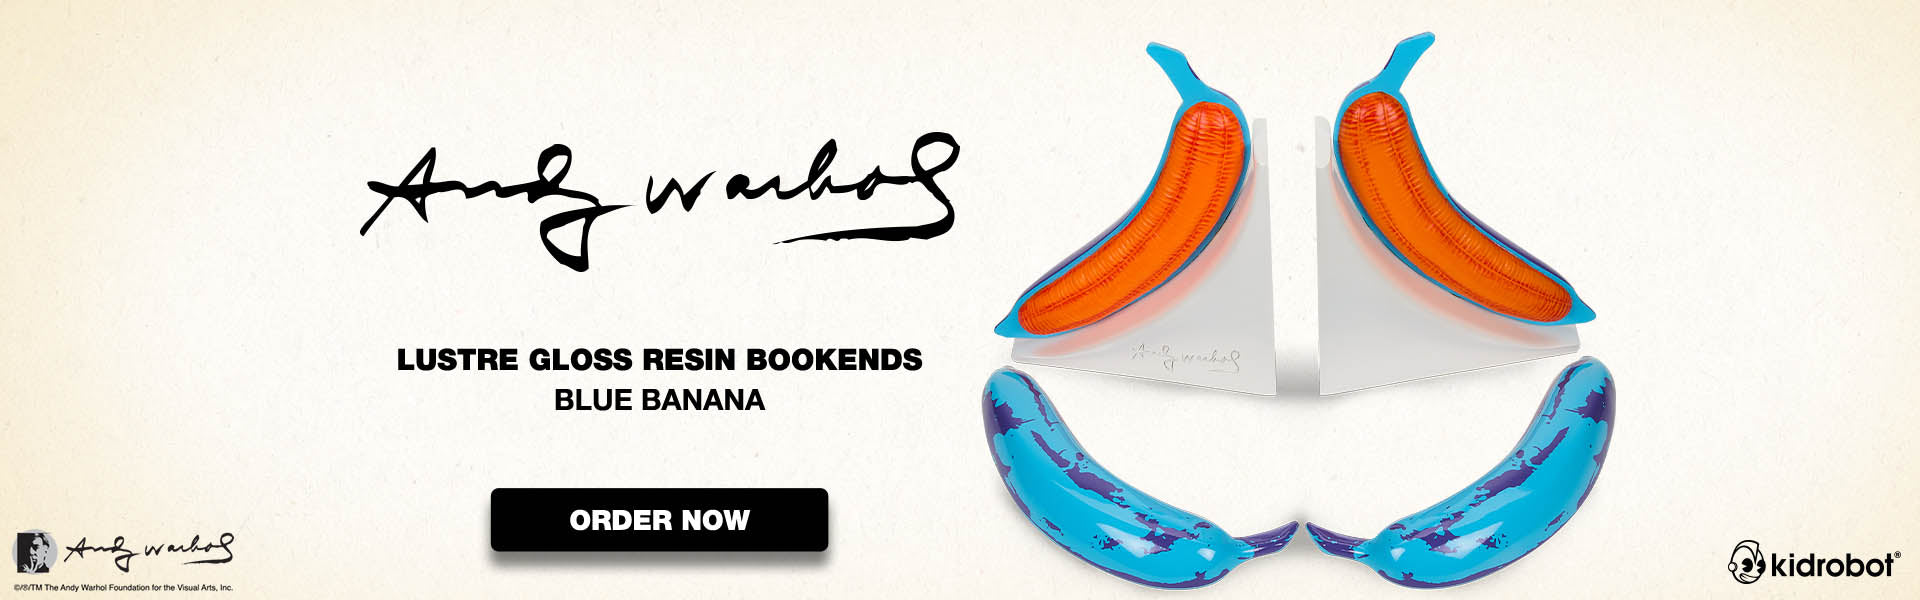 Andy Warhol 10” Lustre Gloss Resin Bookends - Blue Banana